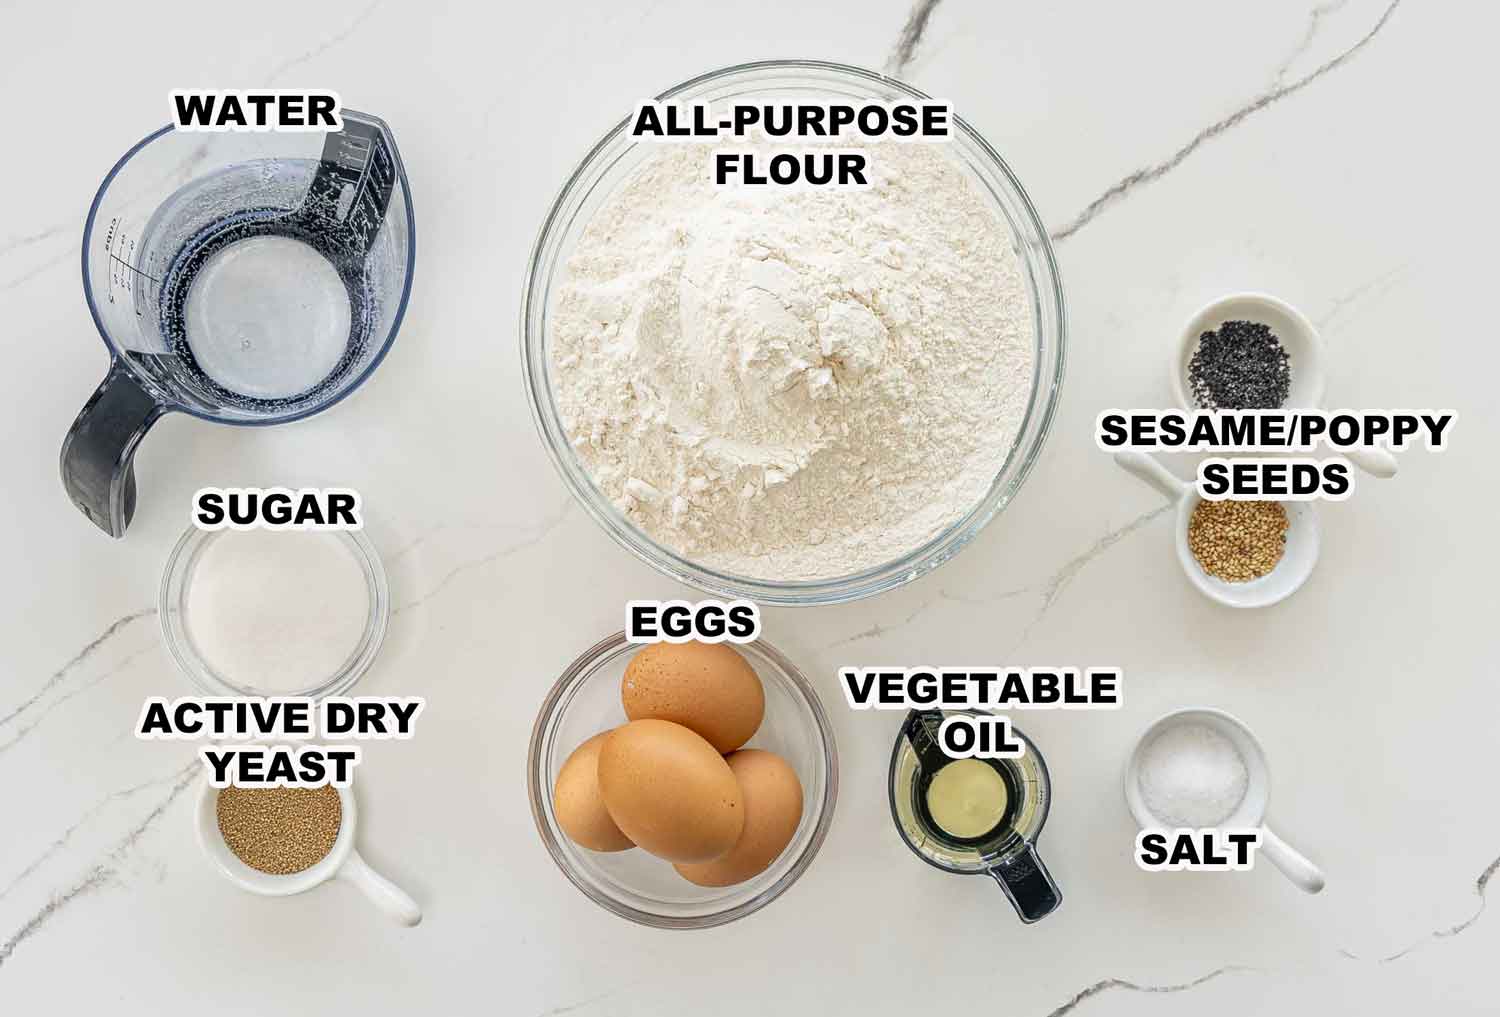 ingredients needed to make challah bread.